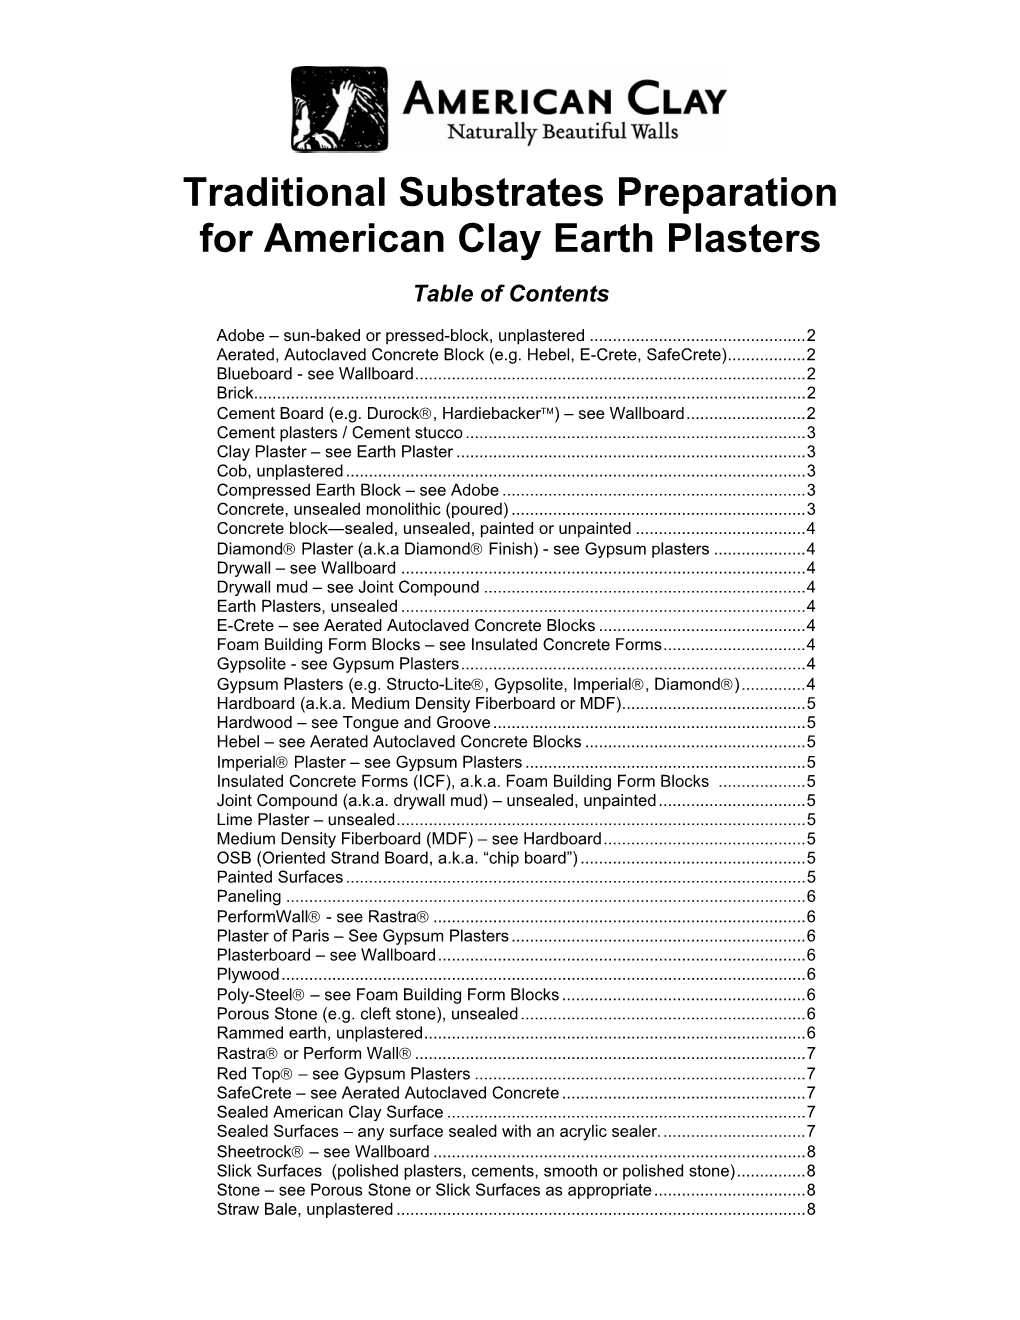 Substrates Preparation for American Clay Earth Plasters